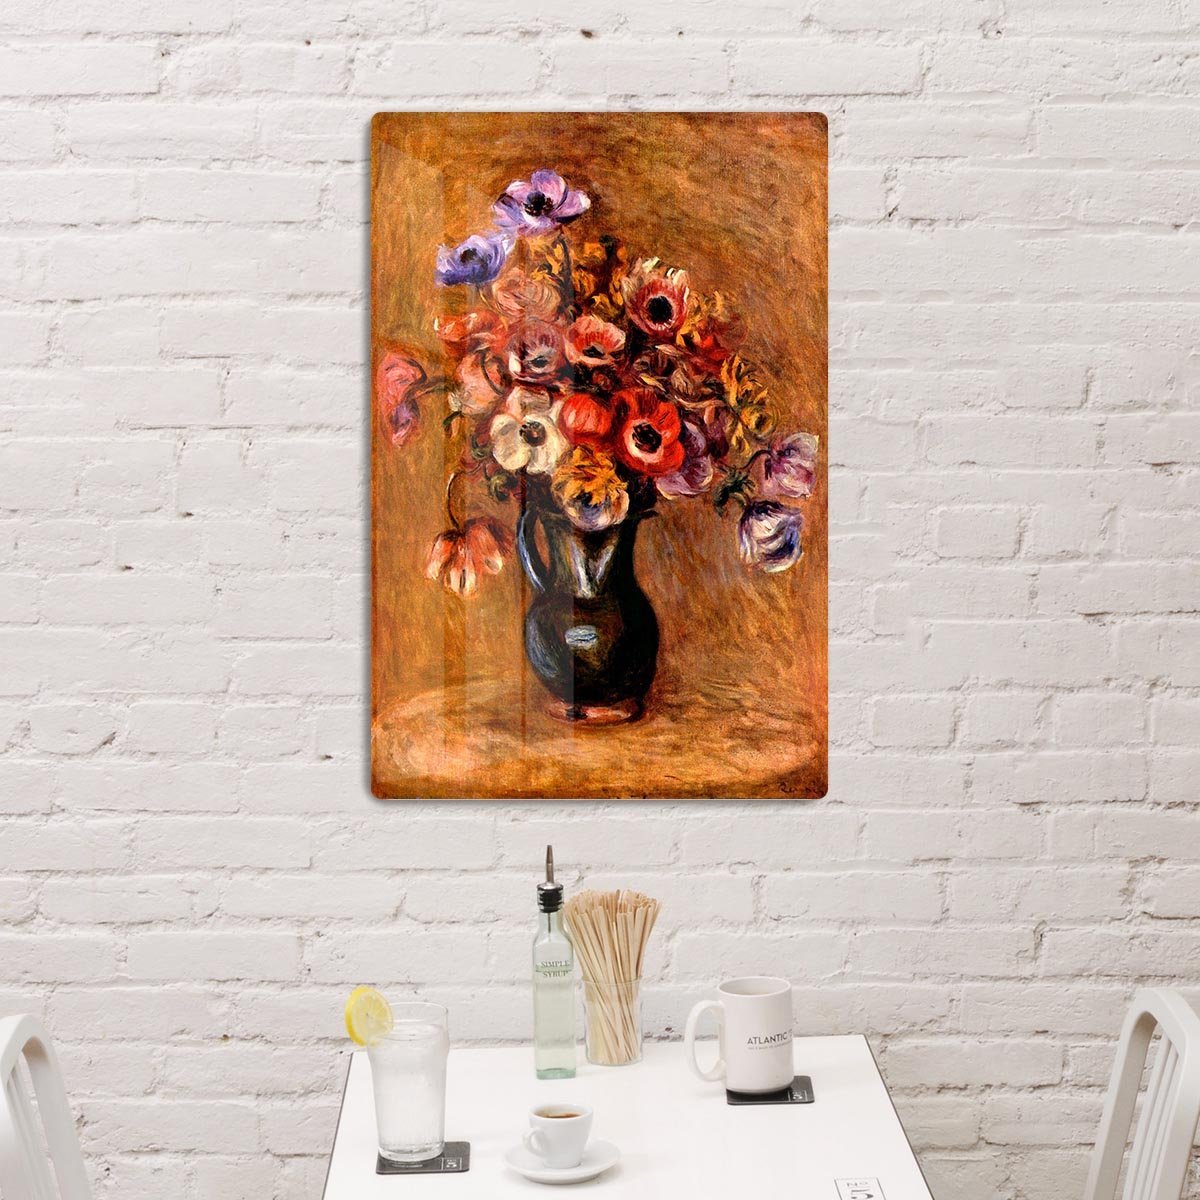 Still life with anemones by Renoir HD Metal Print